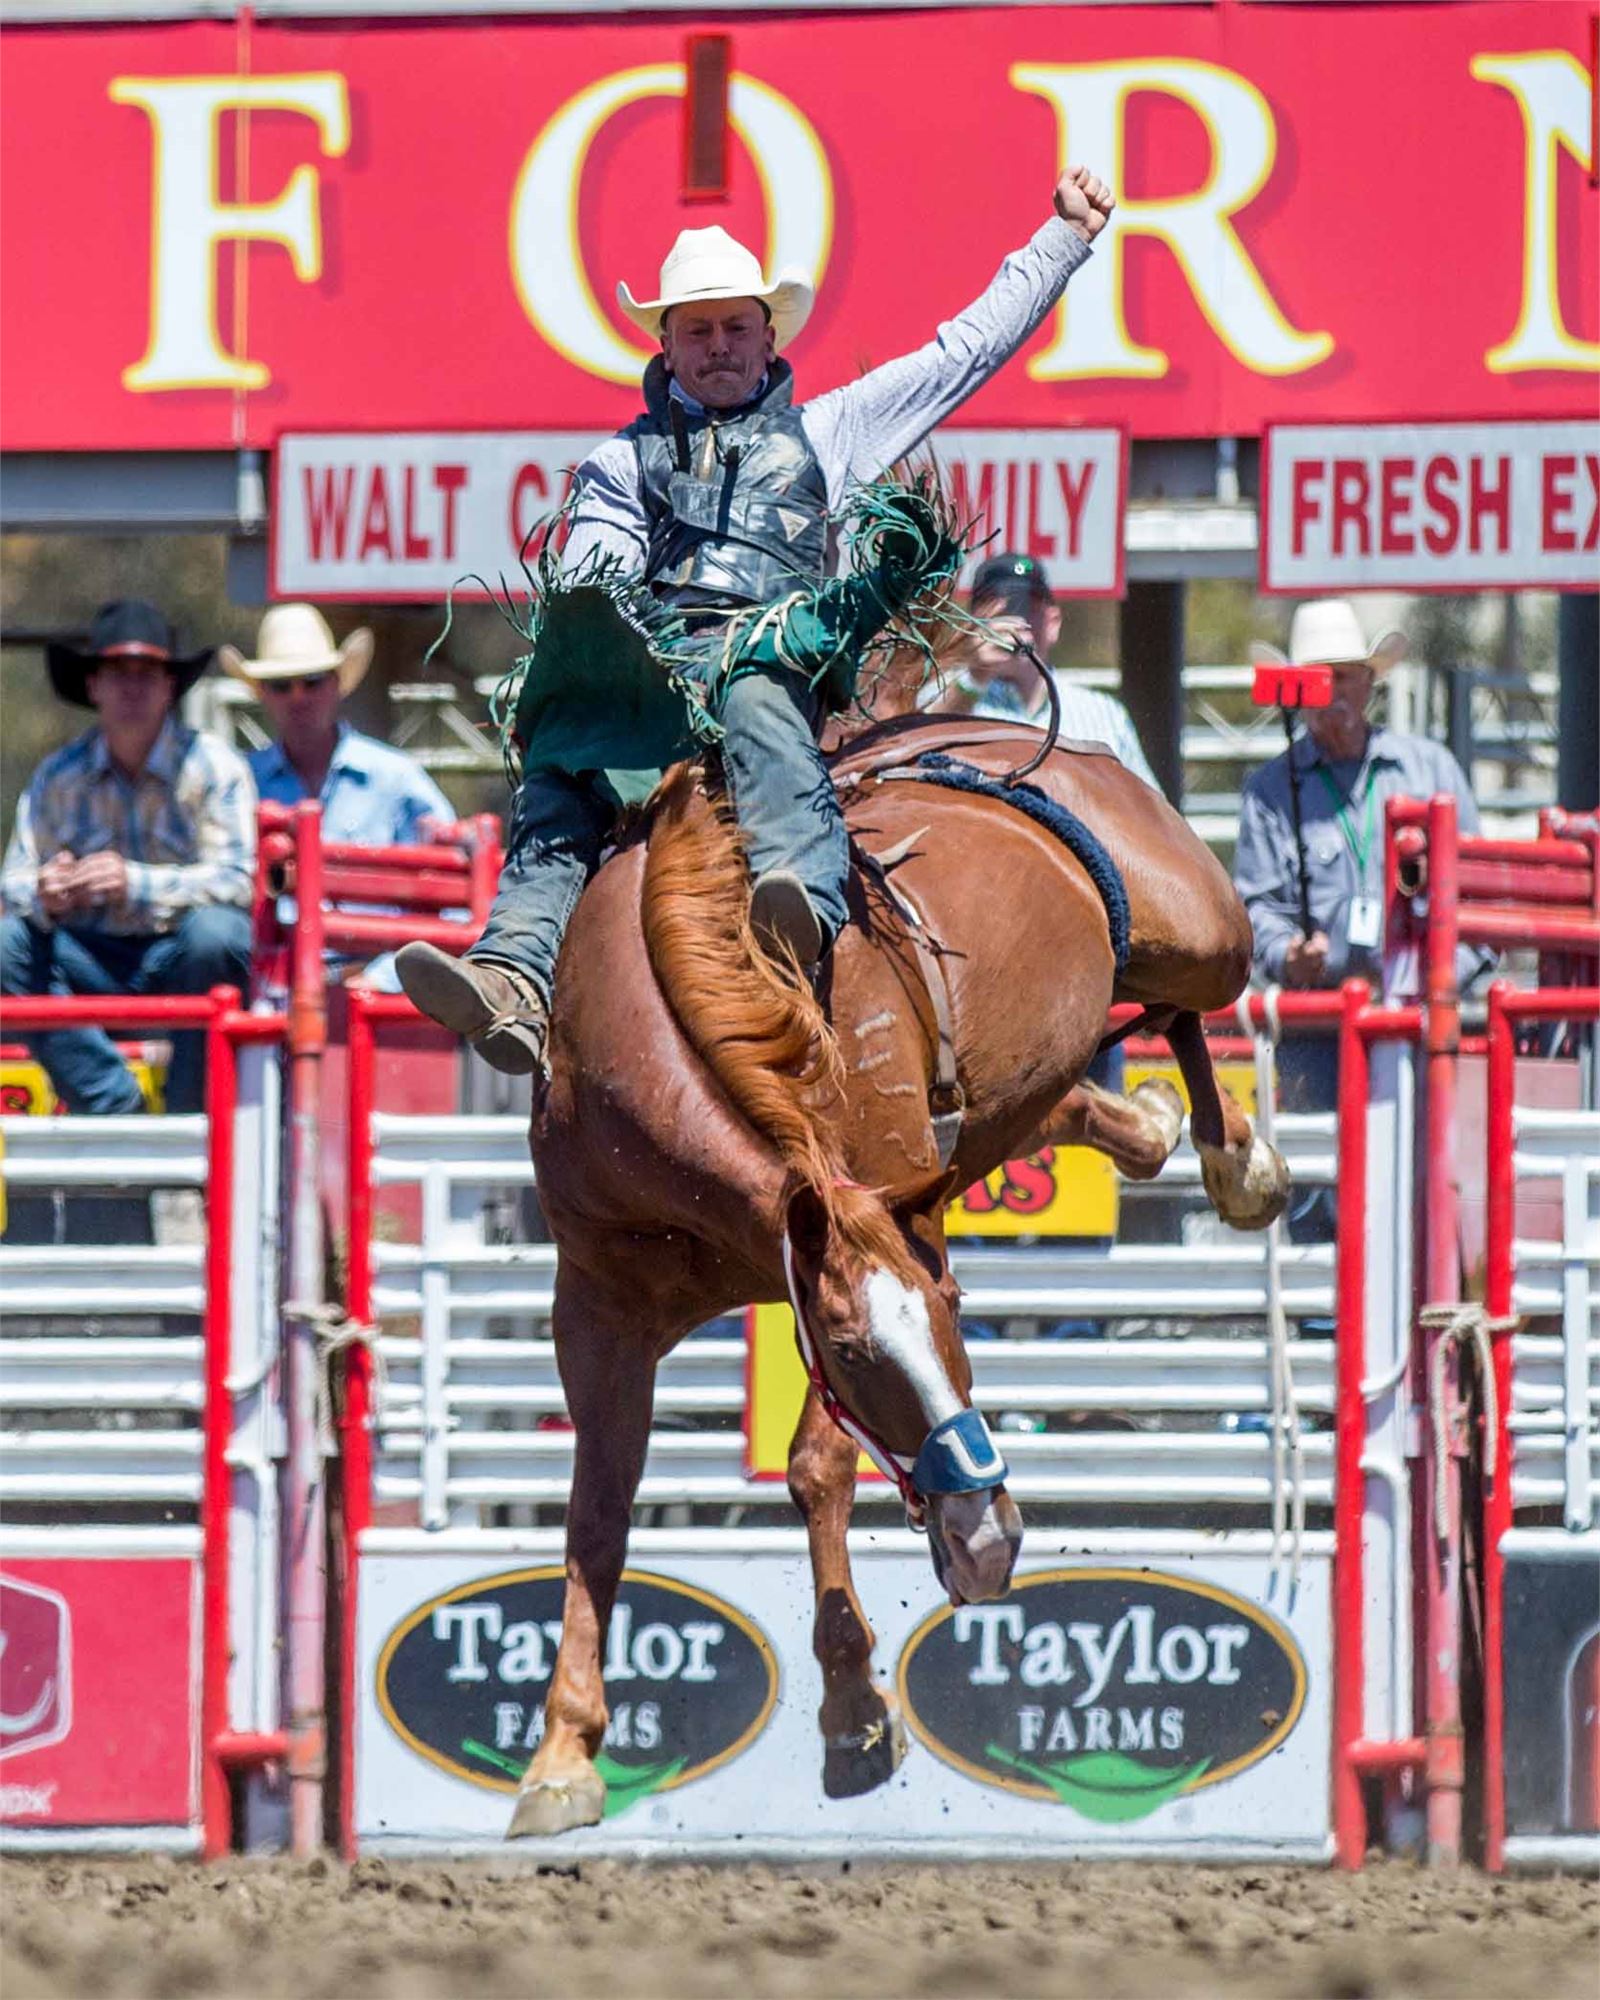 Rodeo Terms: Cowboys, Events & More